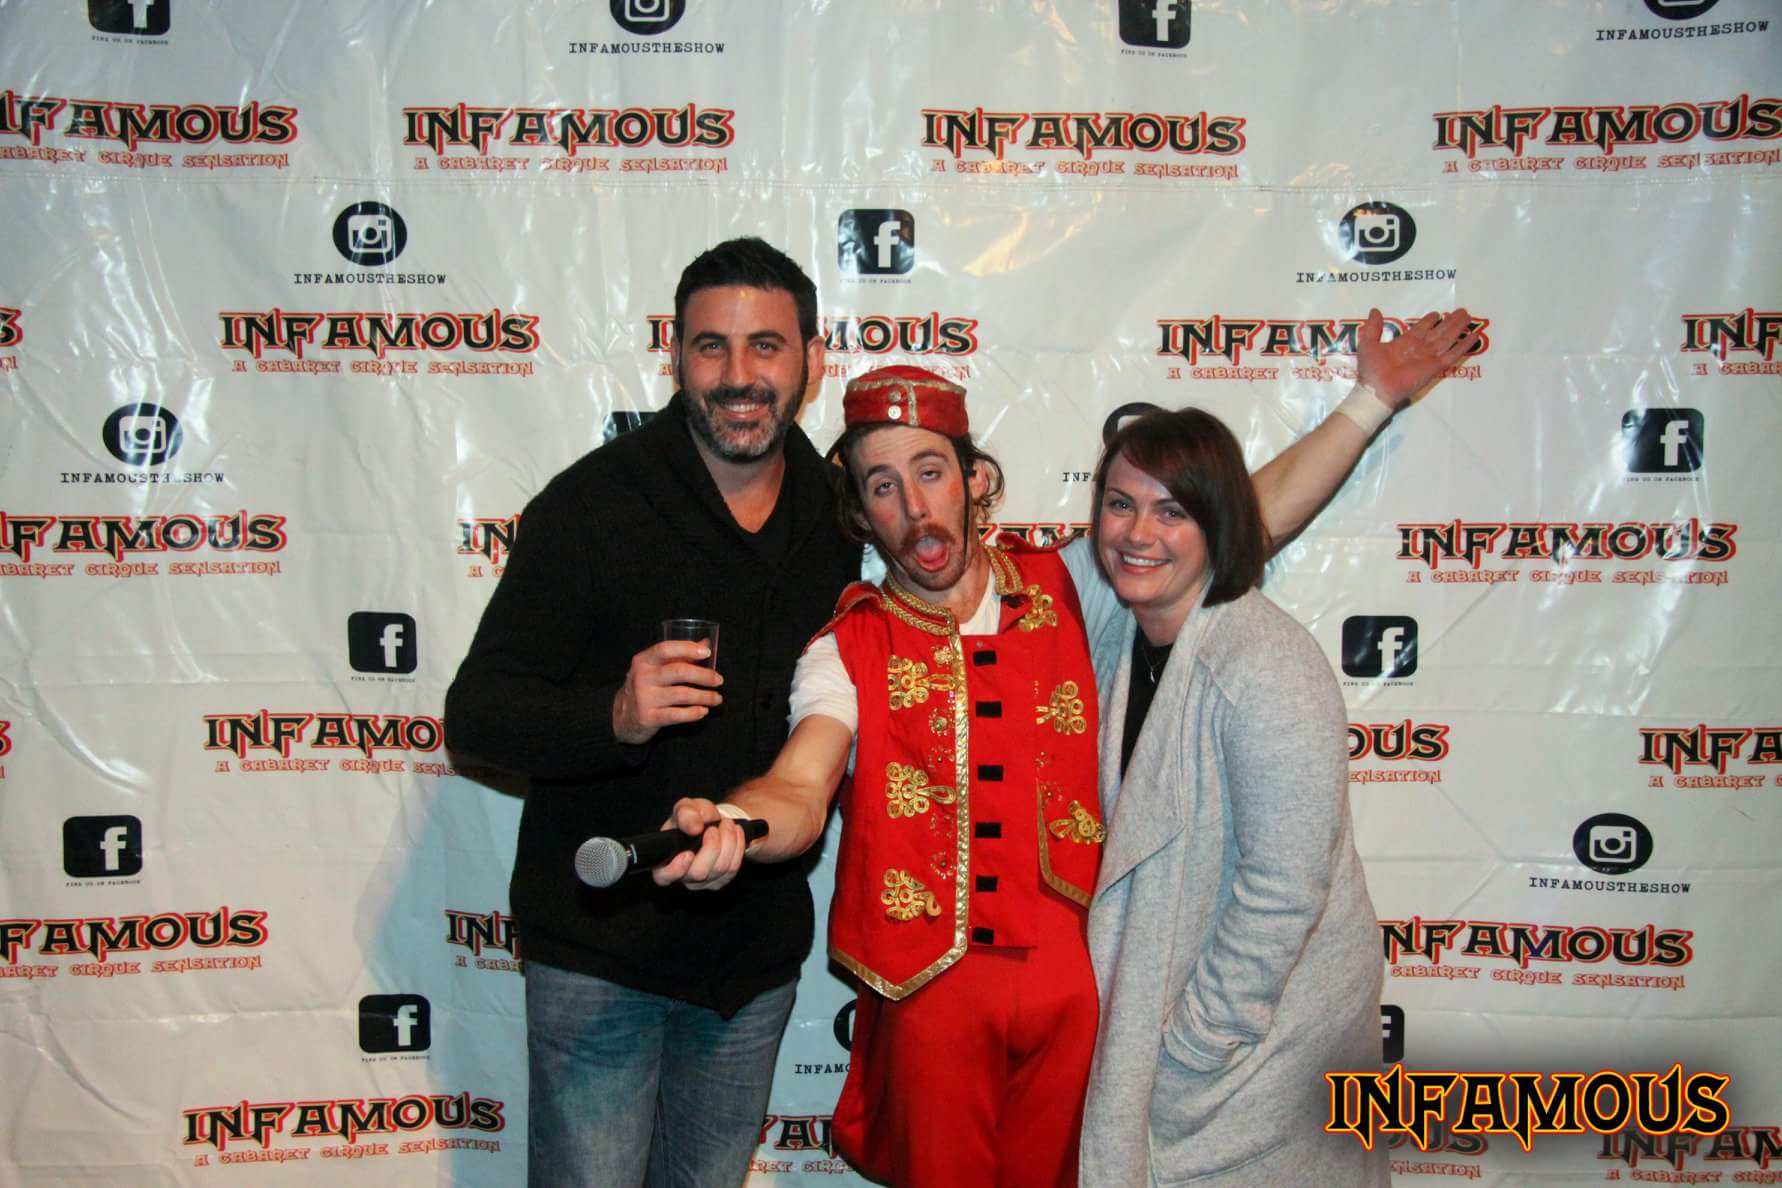 Michael Doig & Louise Connolly at Infamous Circus